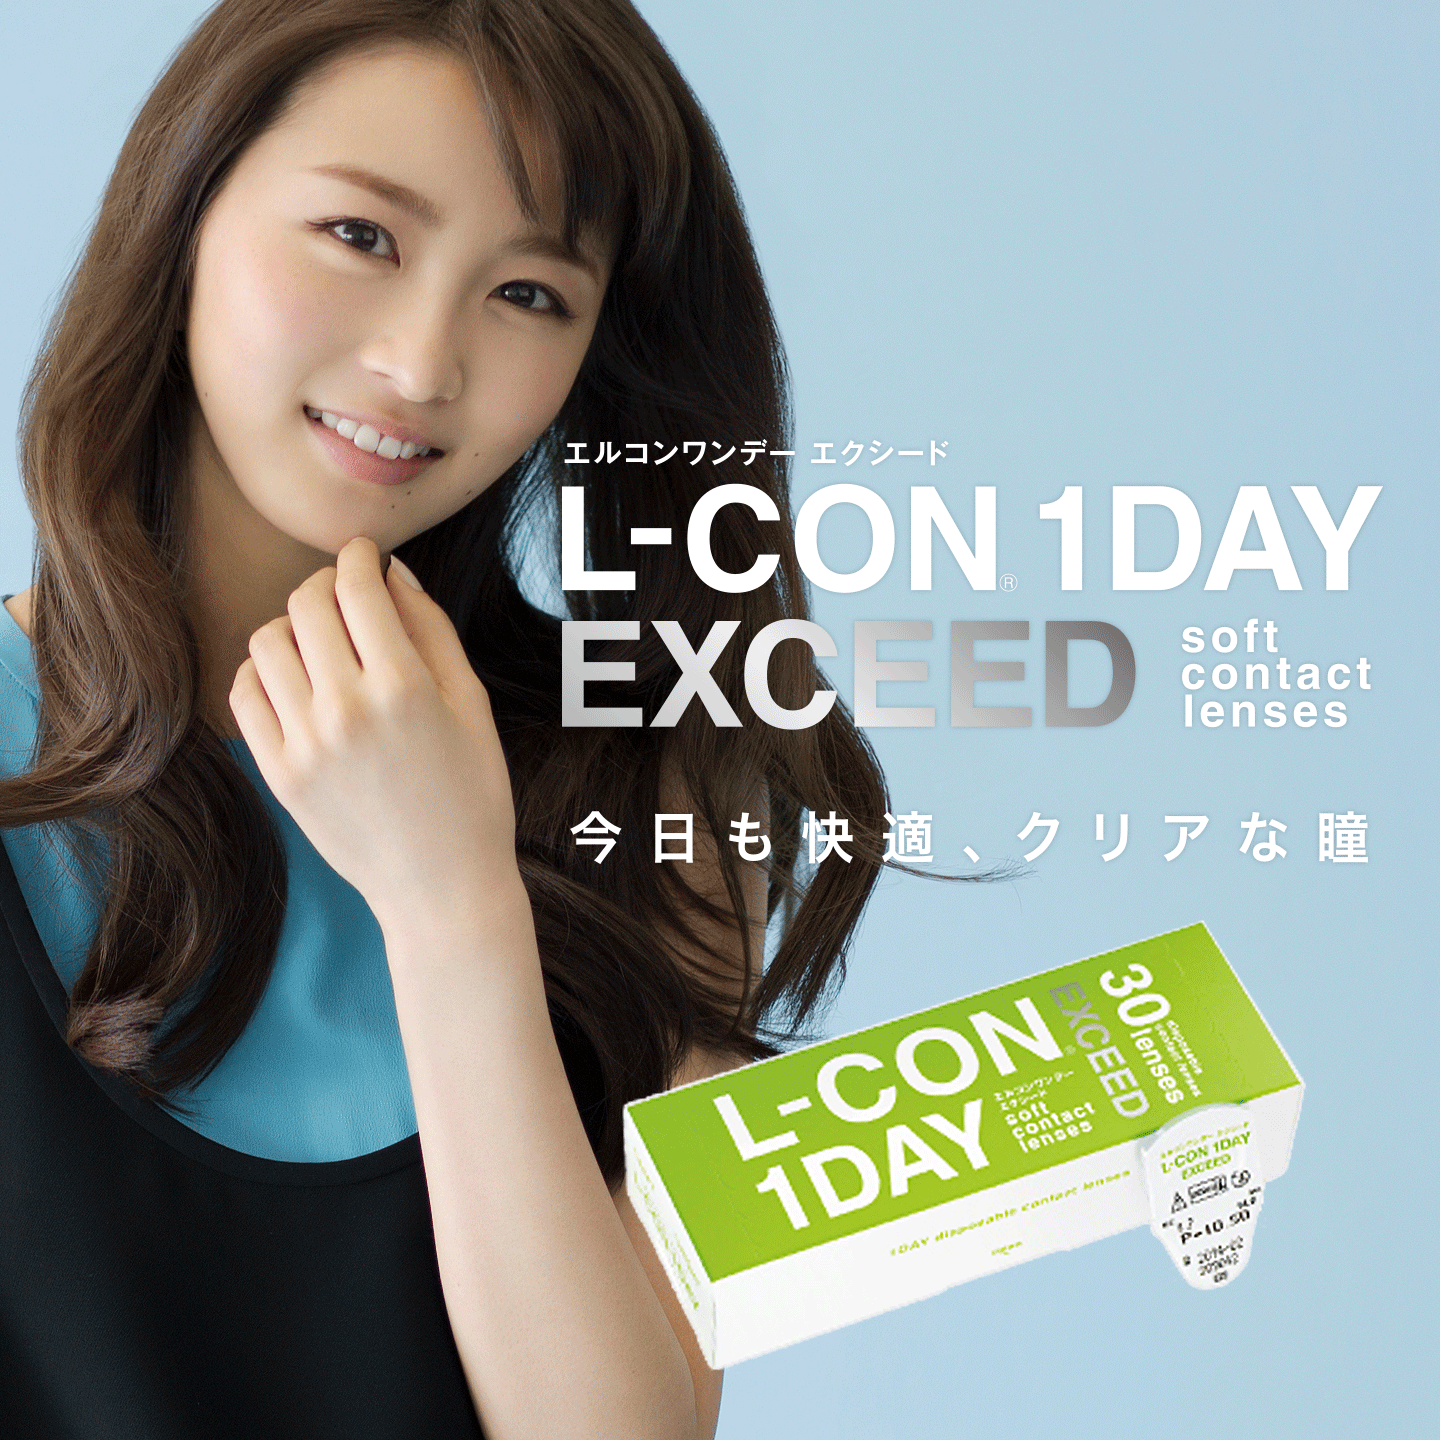 L-CON 1DAY EXCEED